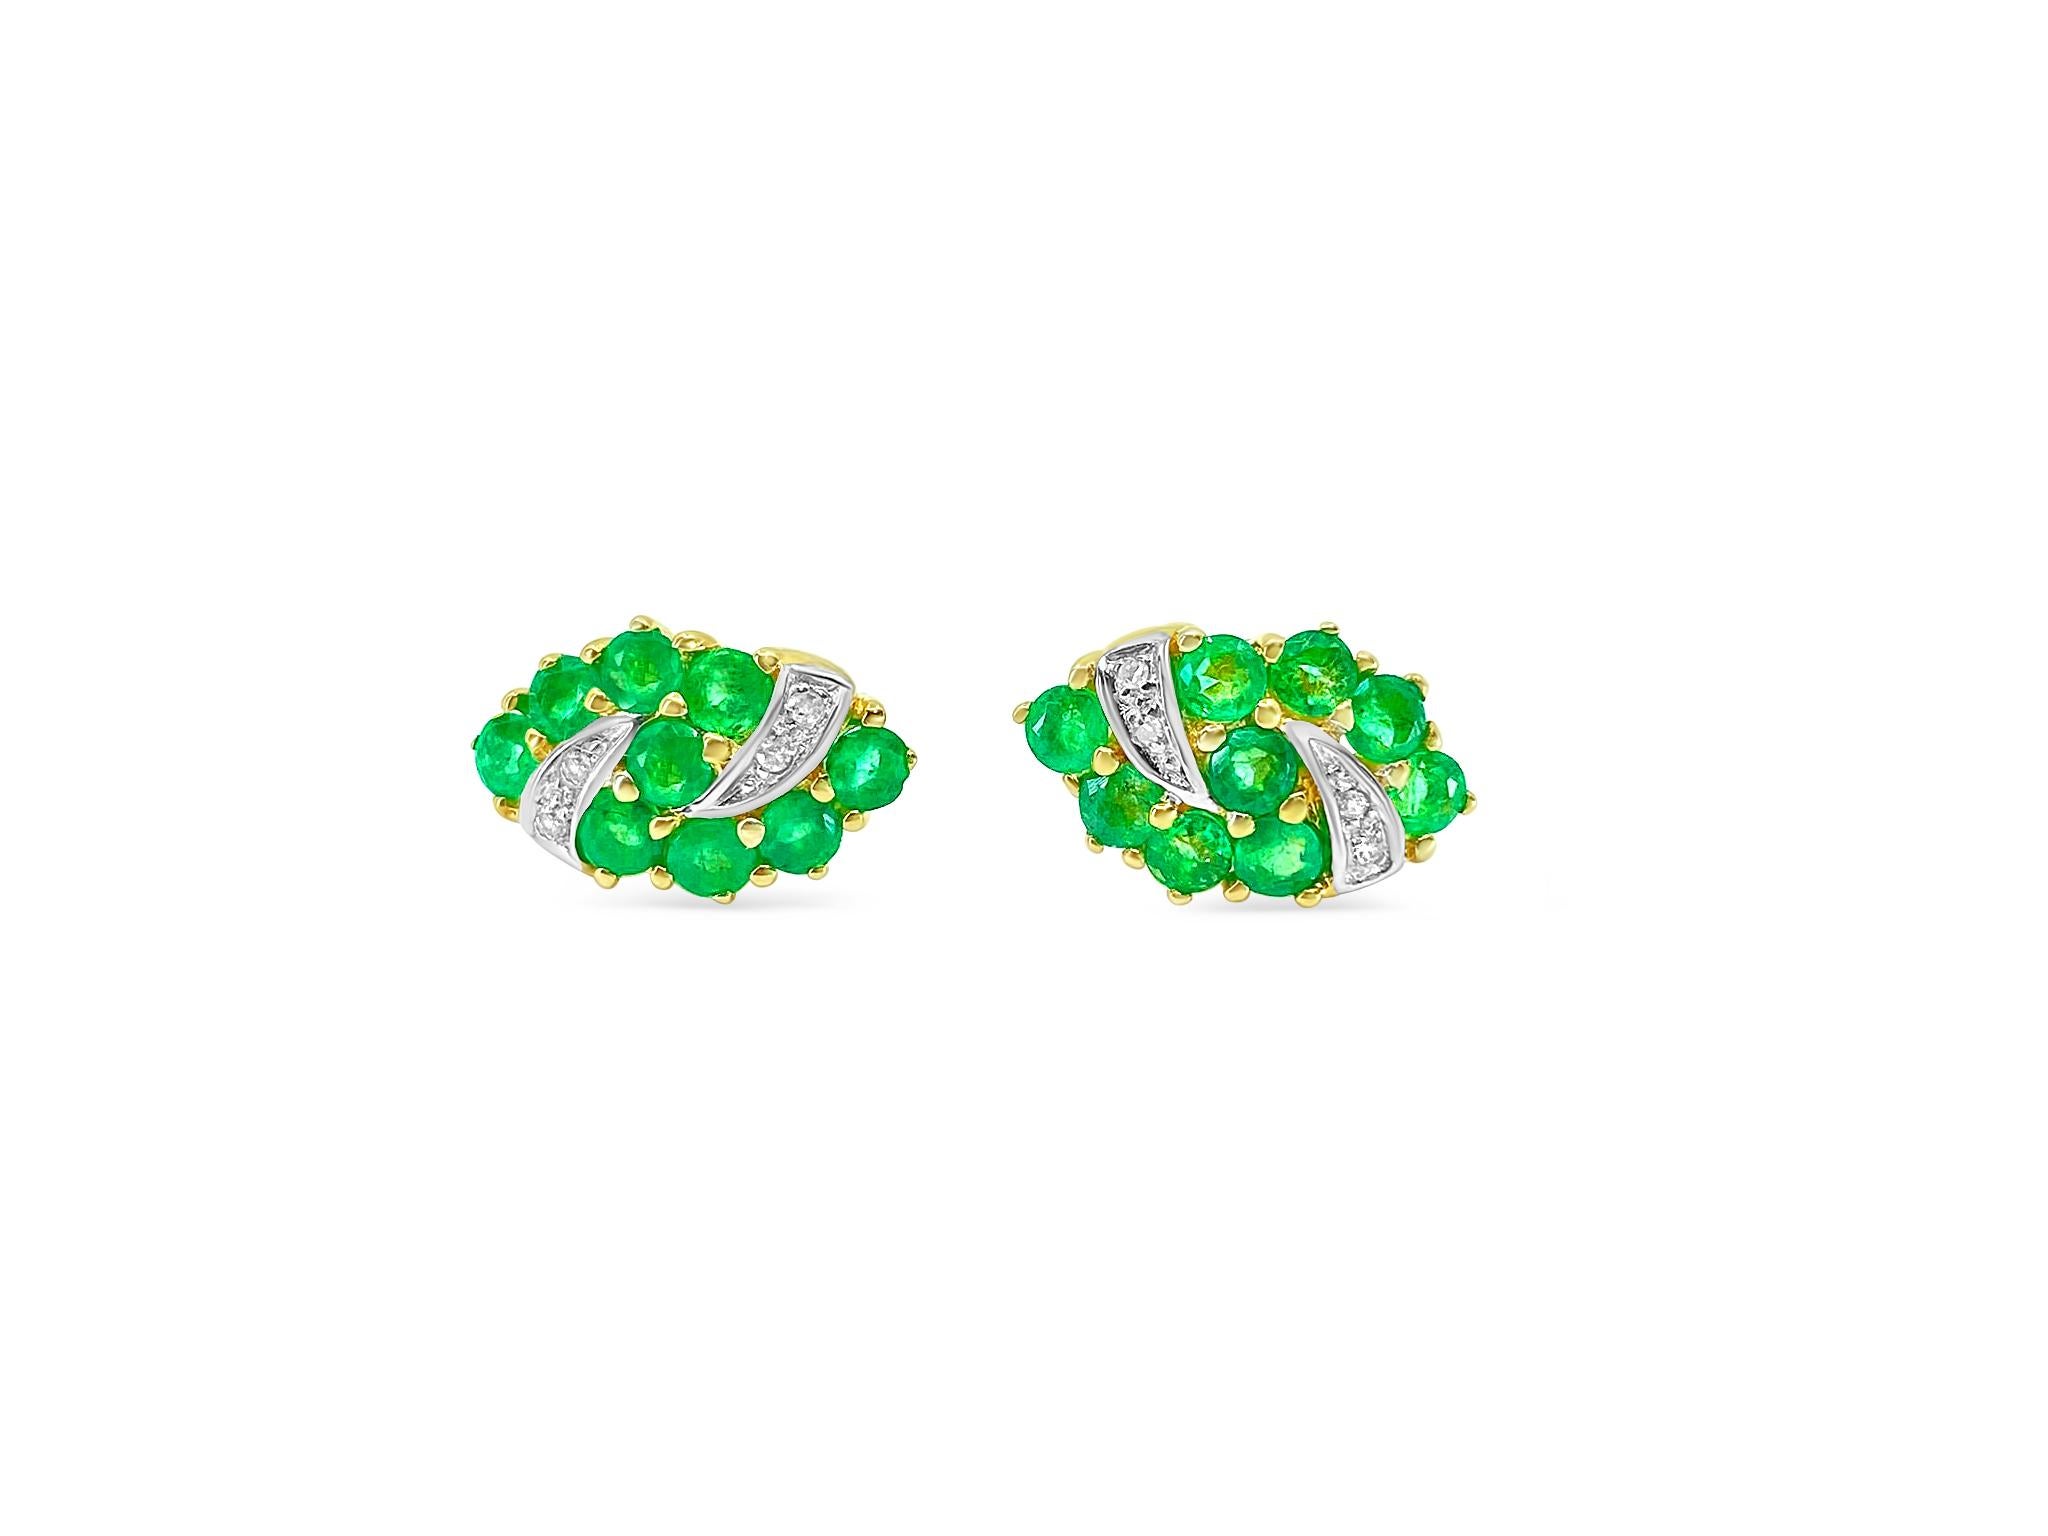 Enhance your elegance with these beautiful earrings crafted from 14k yellow gold, adorned with a total of 3.25 carats of round-cut emeralds and 0.40 carats of round brilliant-cut diamonds. The emeralds, totaling 3.25 carats, radiate beauty and